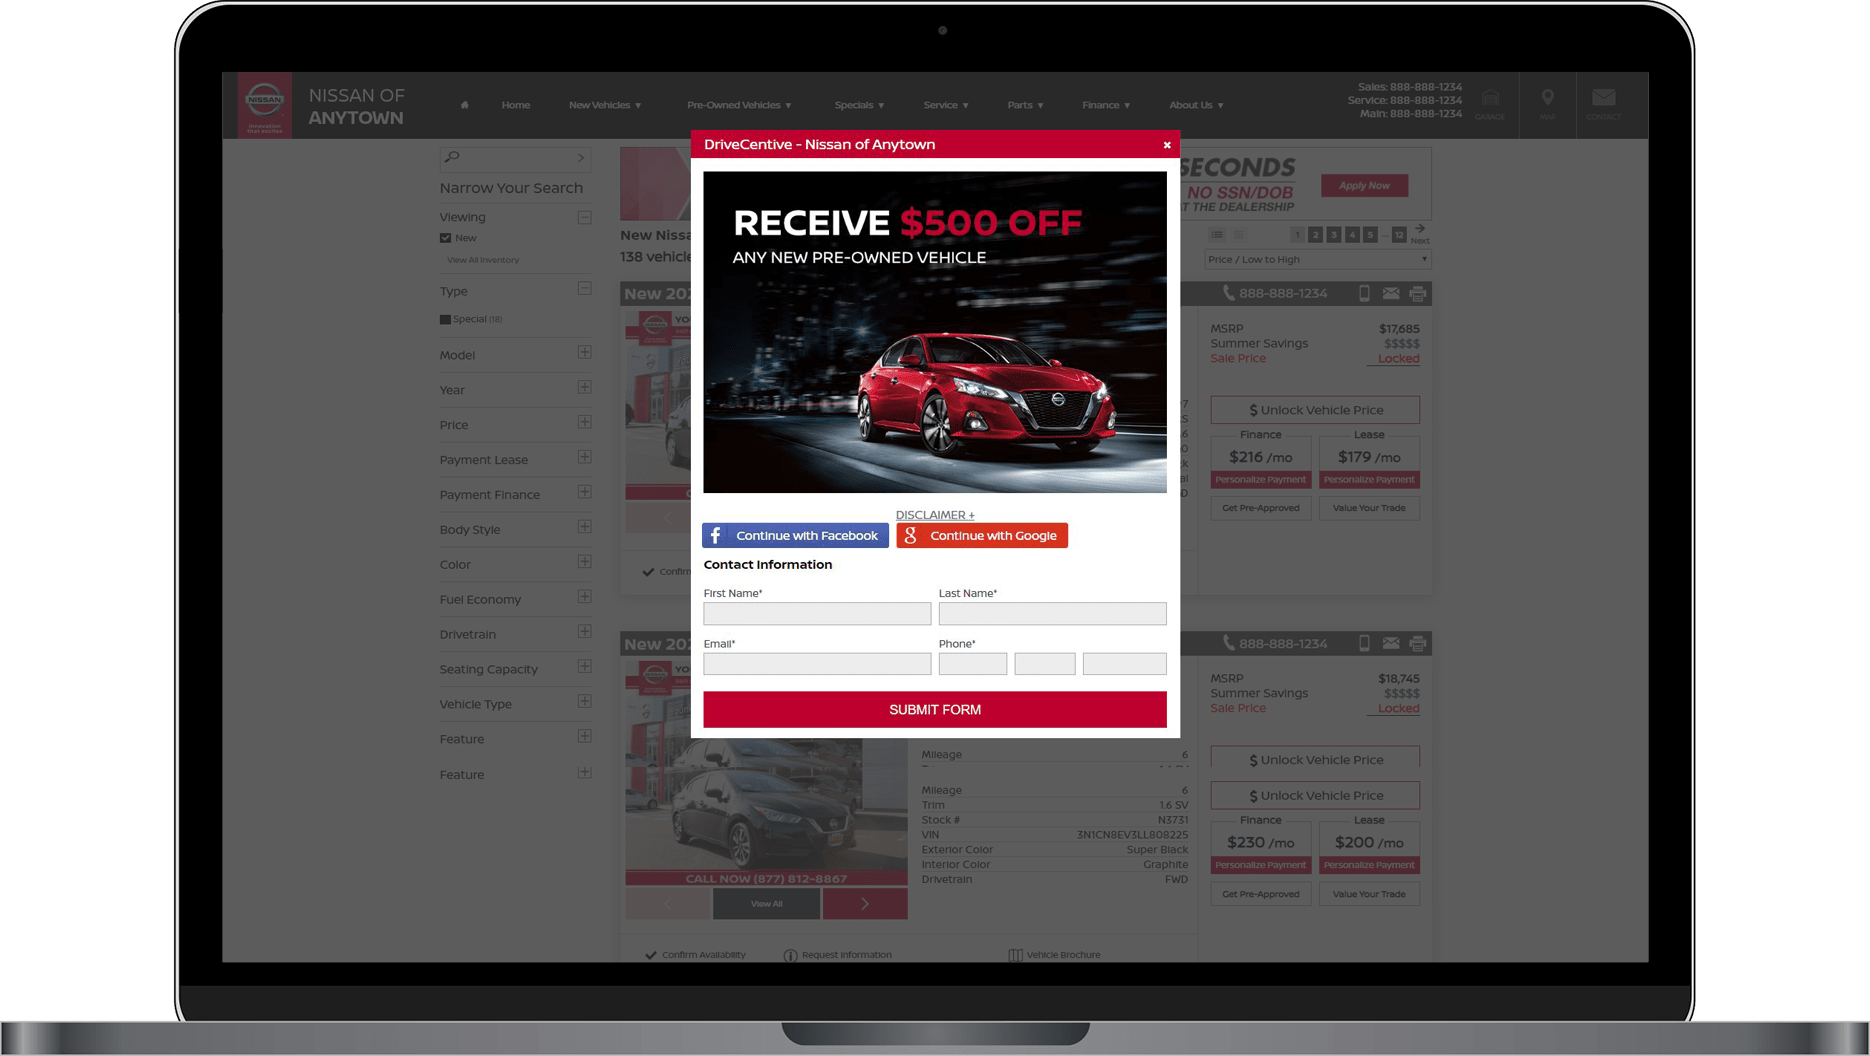 DriveCentive offer shown on laptop screen